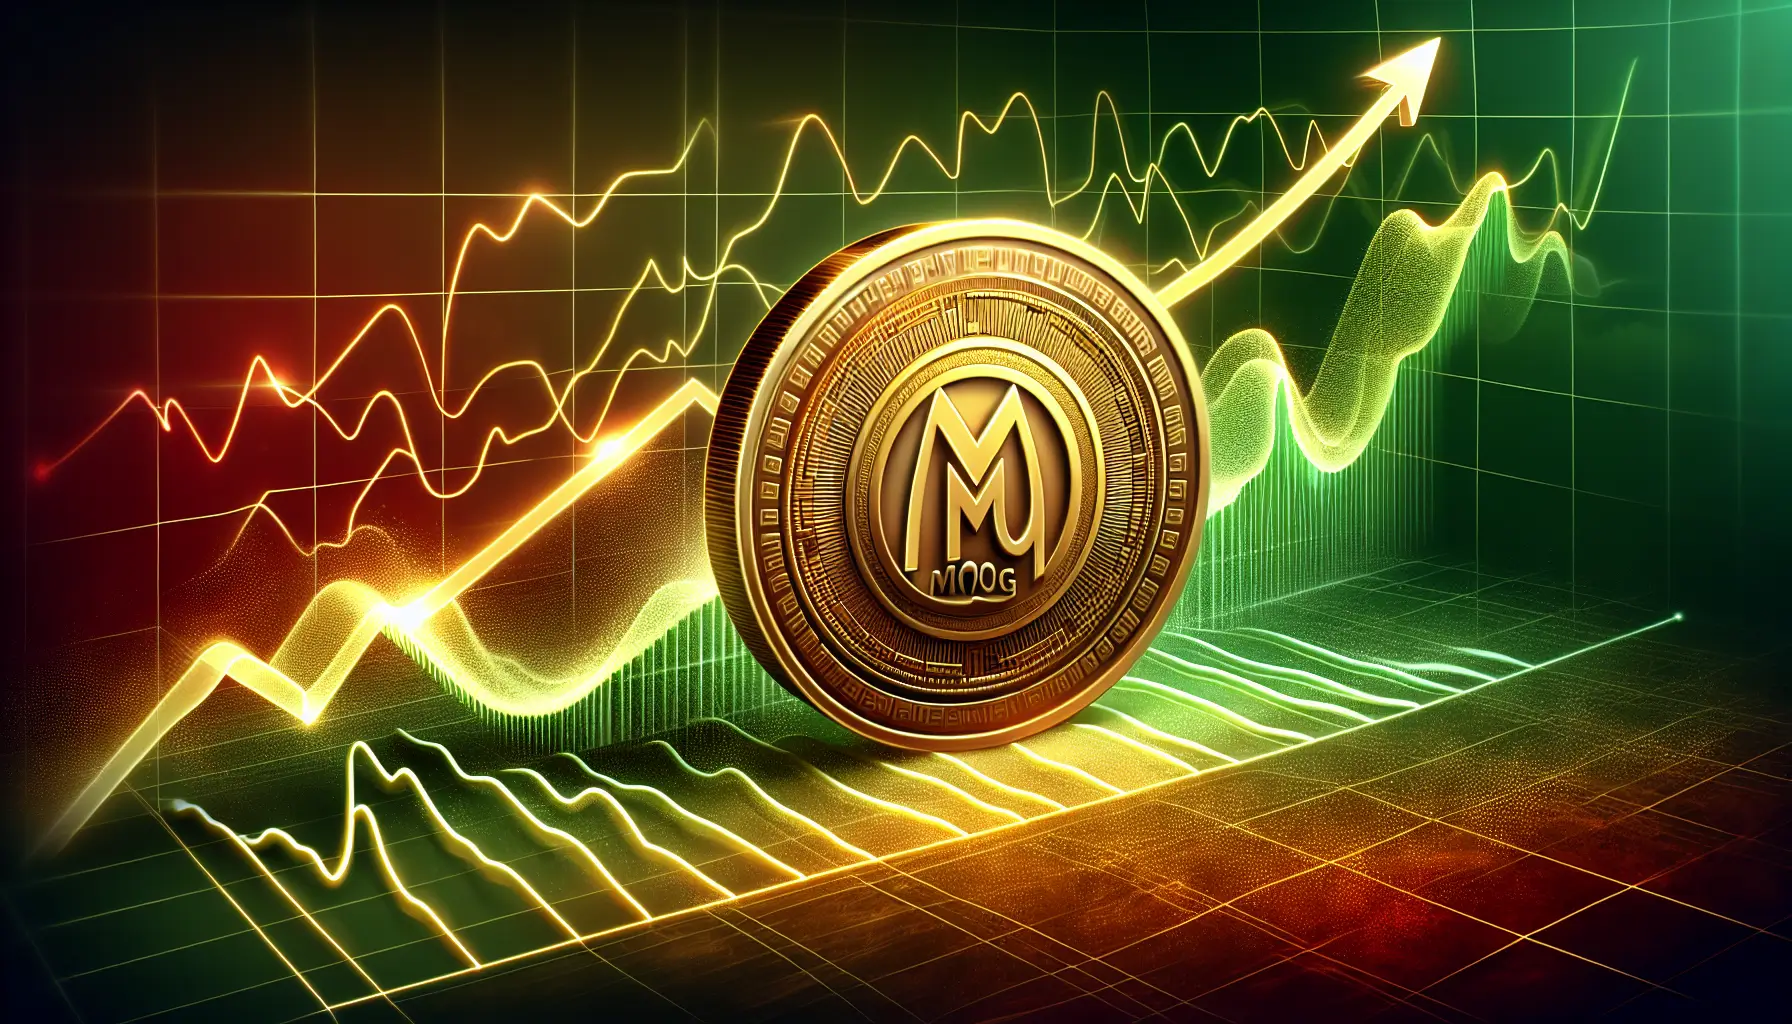 Historical Performance of Mog Coin